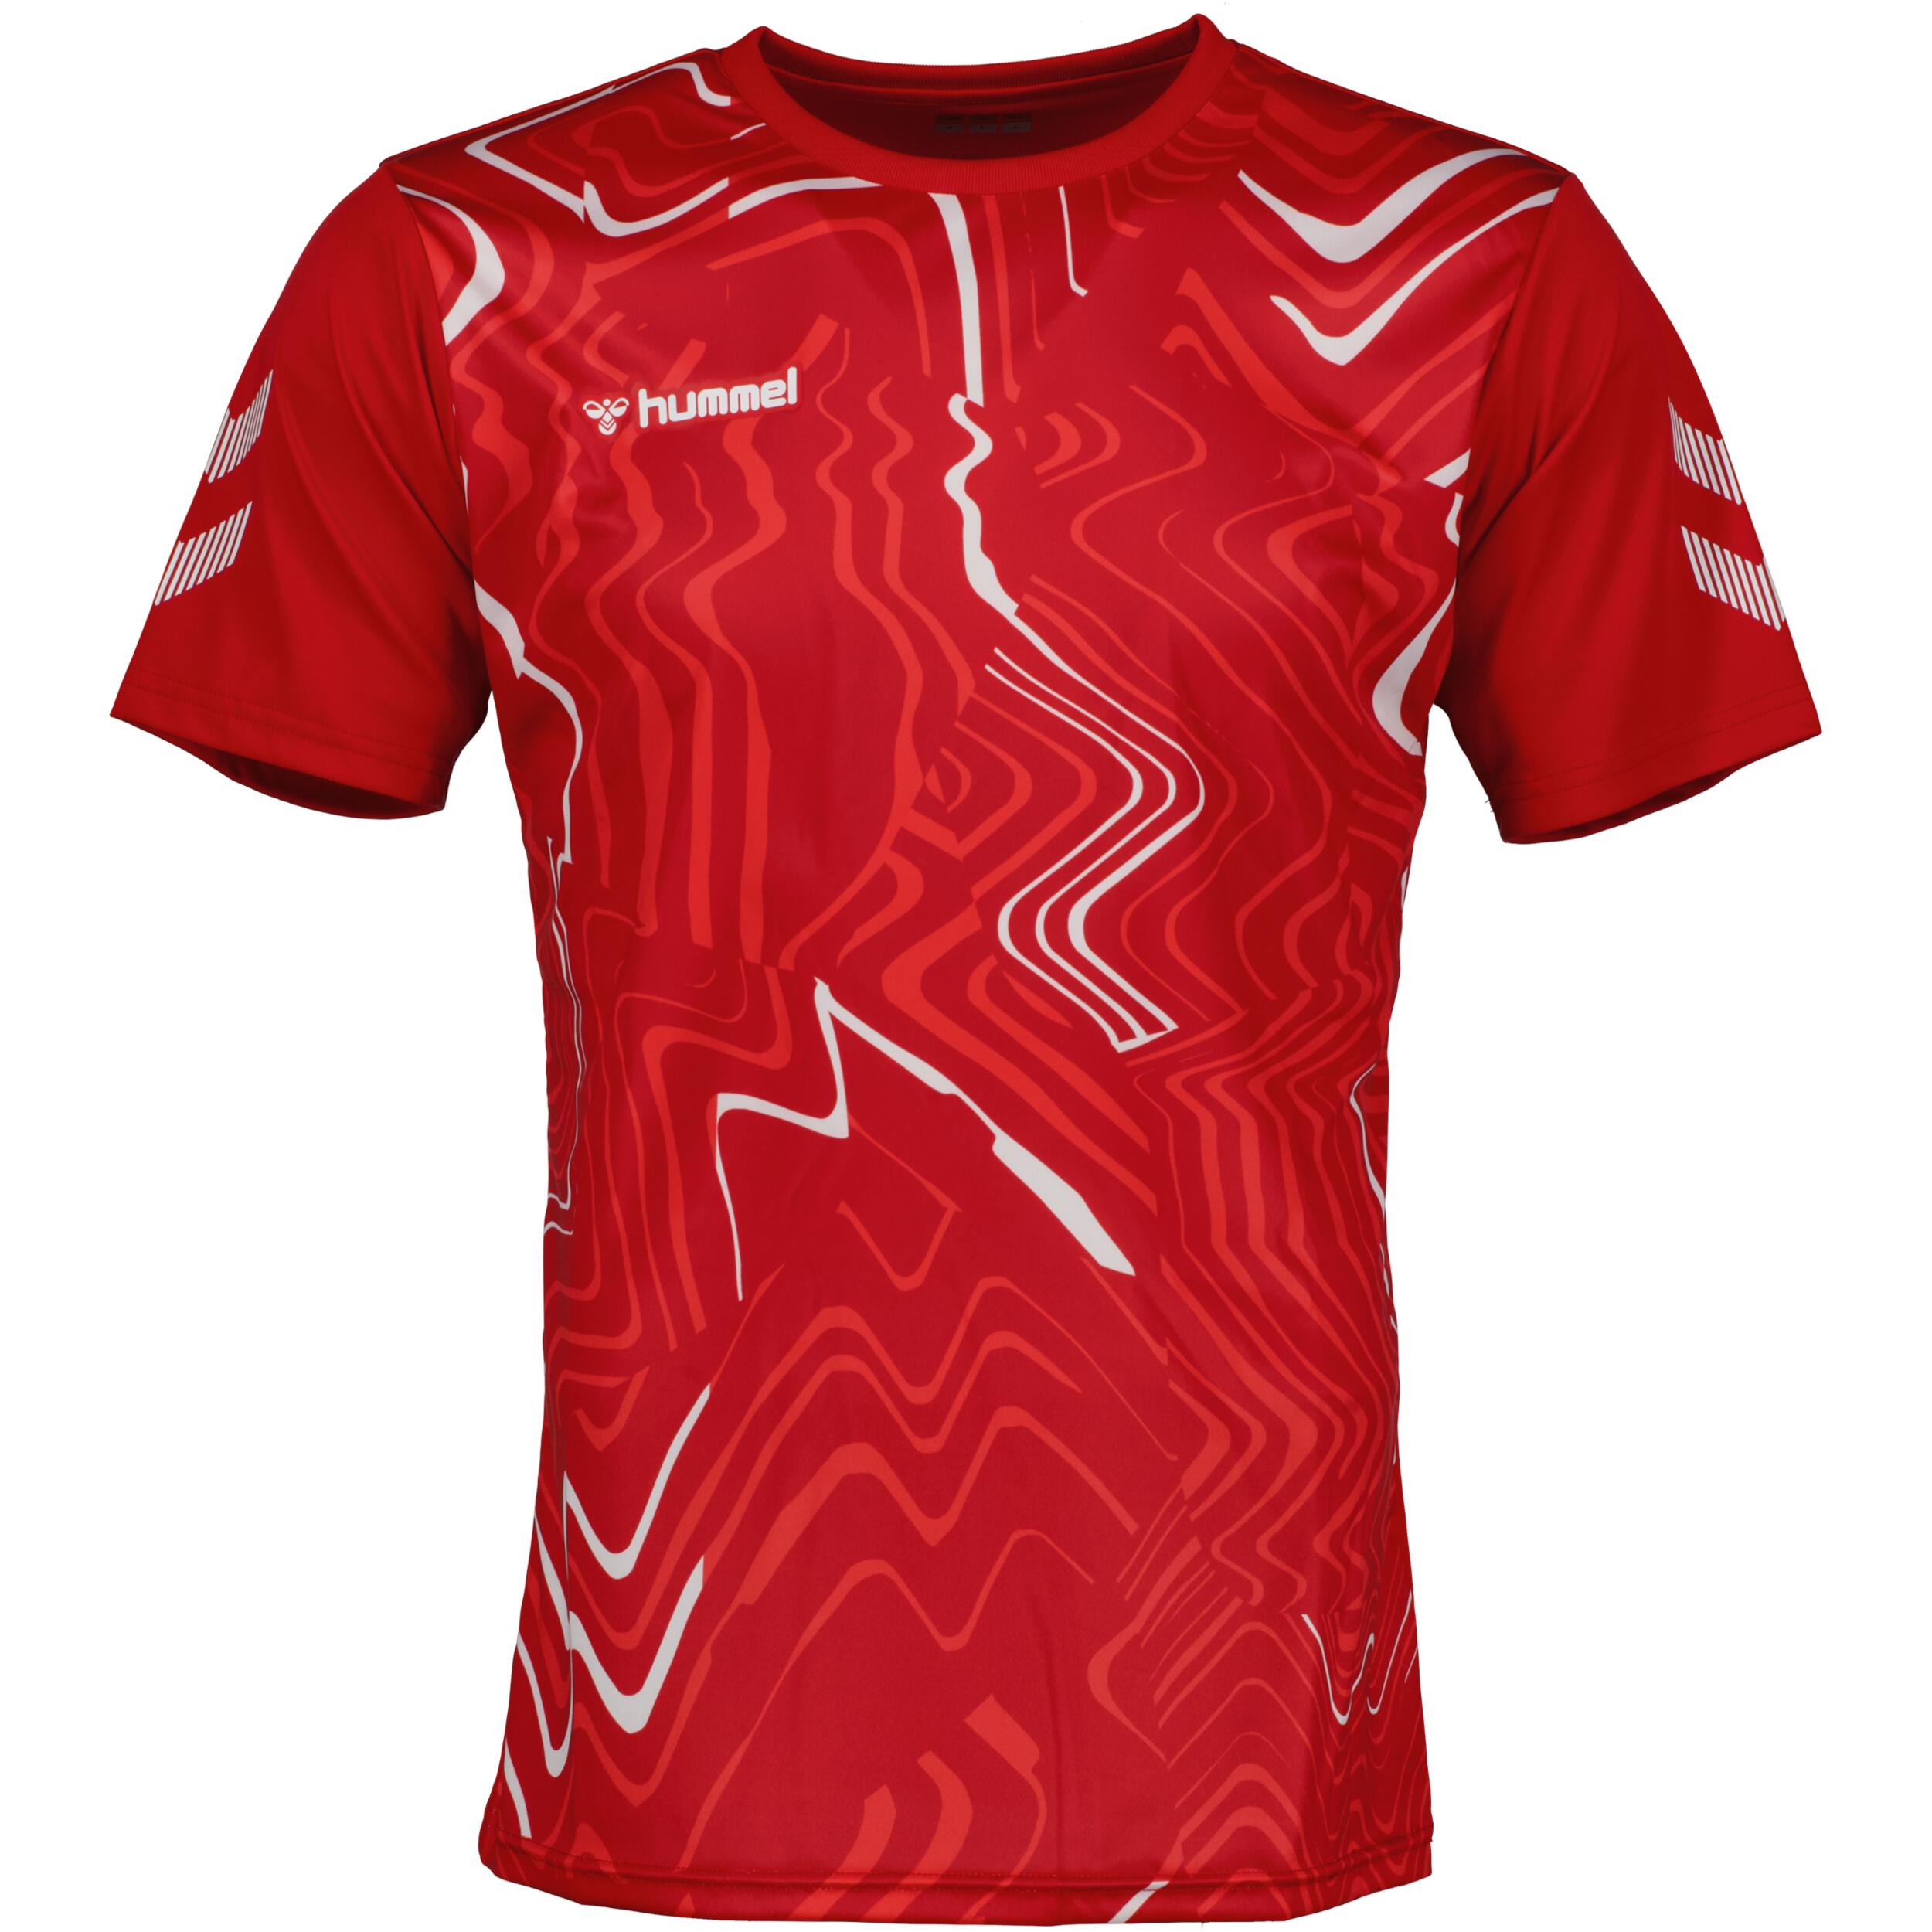 Hydro jersey for kids, great for football, in true red/dark red/white 1/3